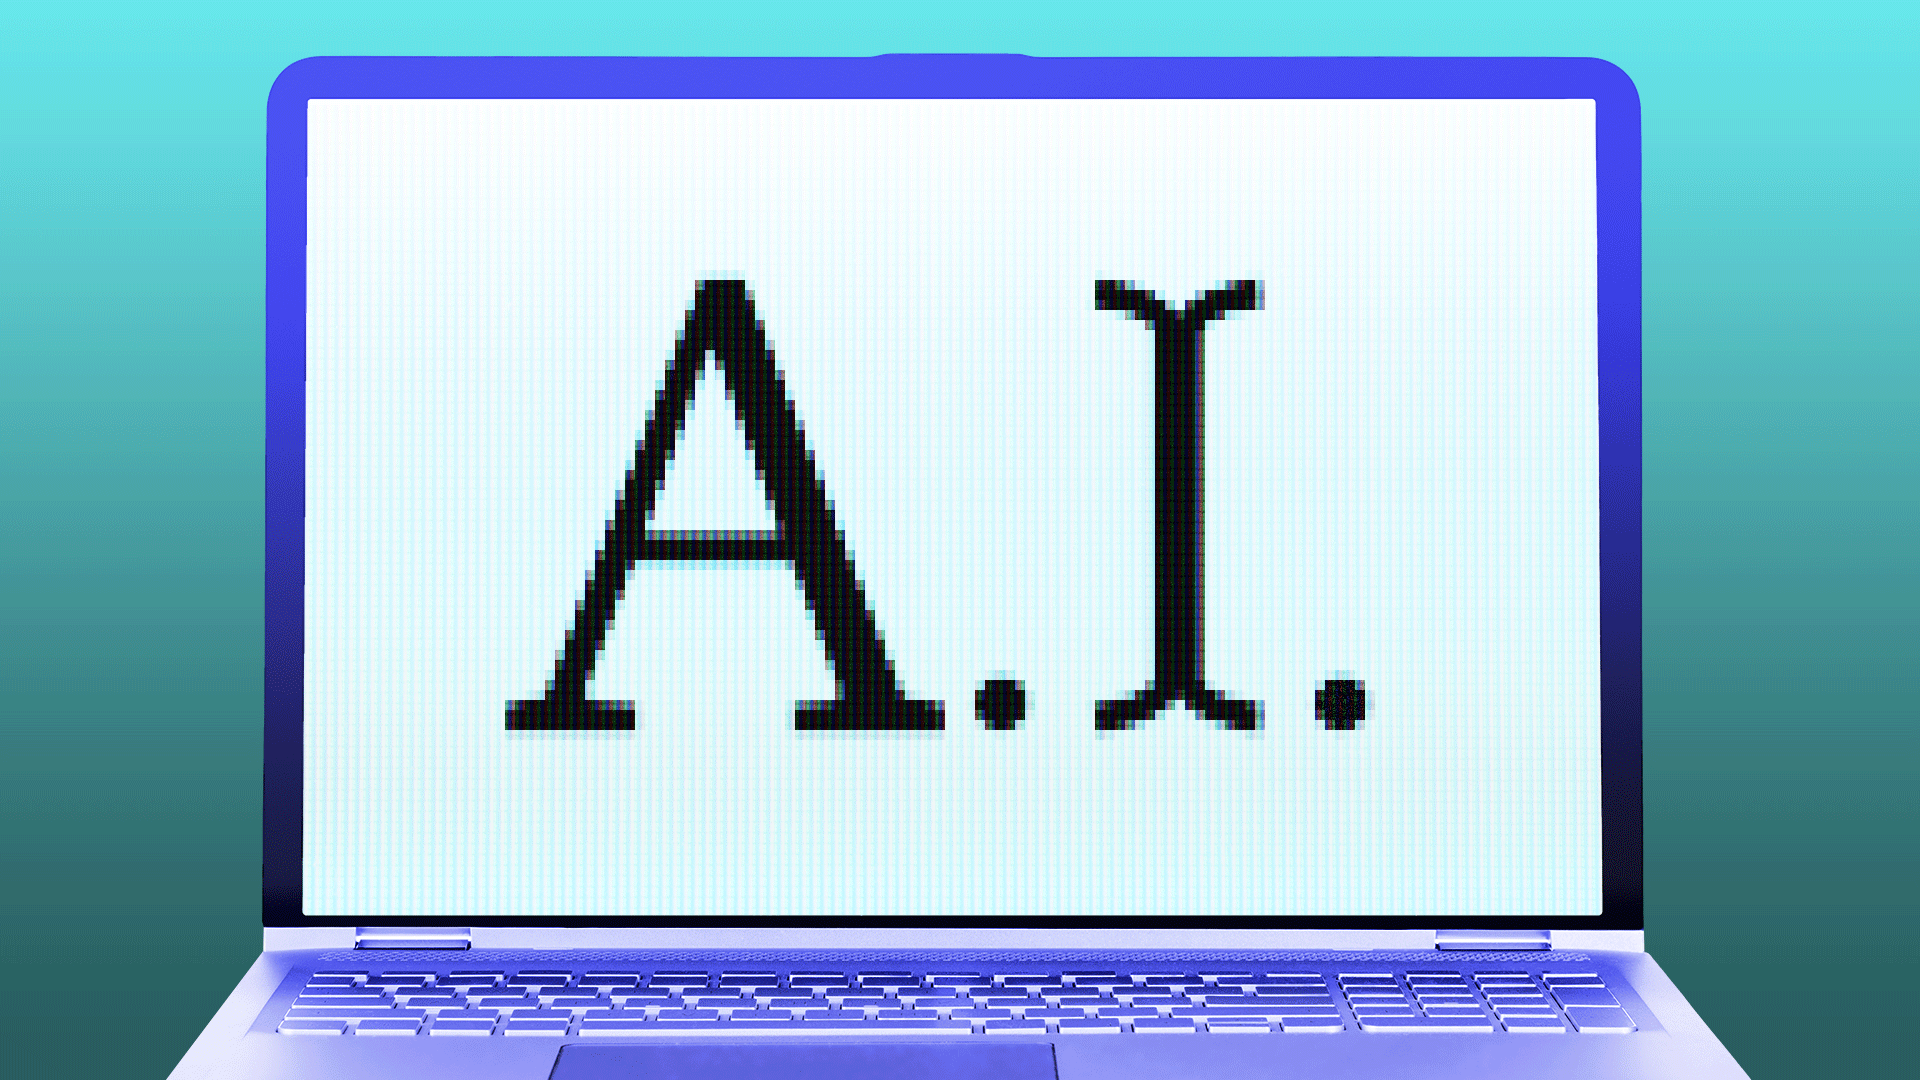 Animated gif of a computer screen that reads "A.I" with the "I" as a blinking cursor